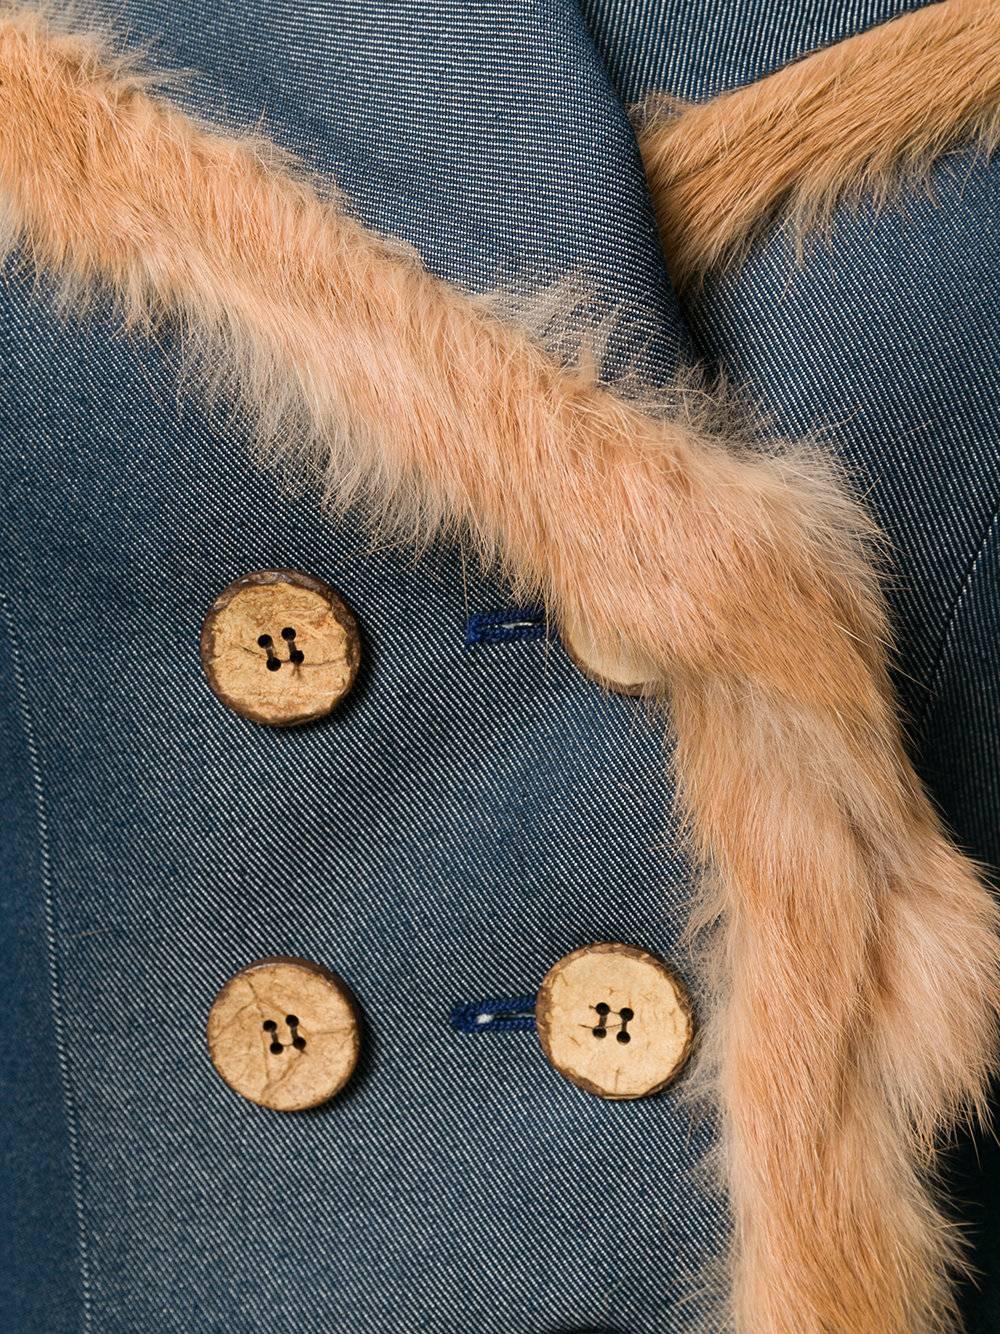 1990s Blue and camel-coloured silk-cotton blend, silk and rabbit fur double-breasted denim jacket from John Galliano Vintage. 
size 40 FR
Lining Composition
Silk 100%
Lining Composition
Rabbit Fur 100%
Outer Composition
Cotton 46%
Outer